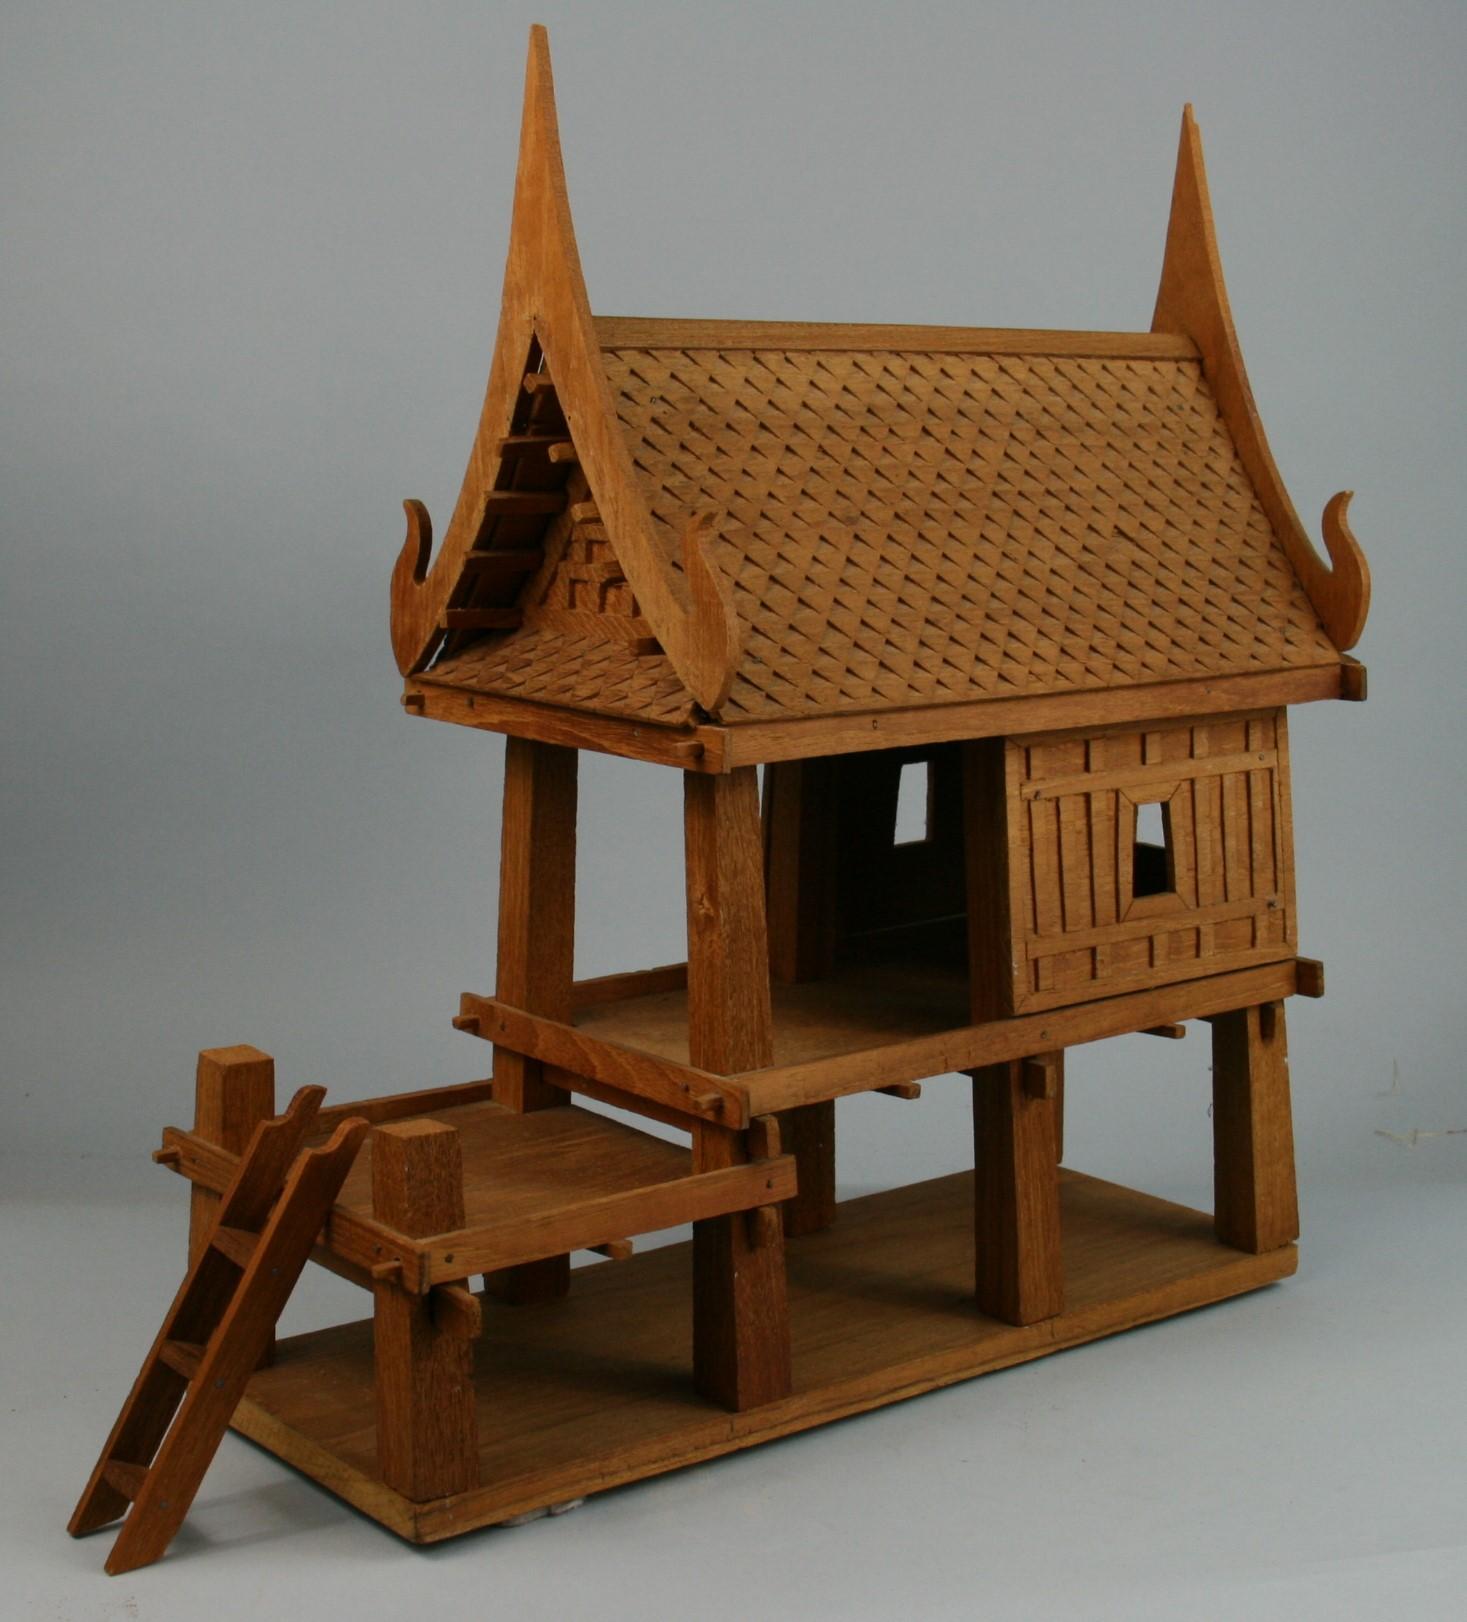 3-565 hand crafted teak Indonesian house model.